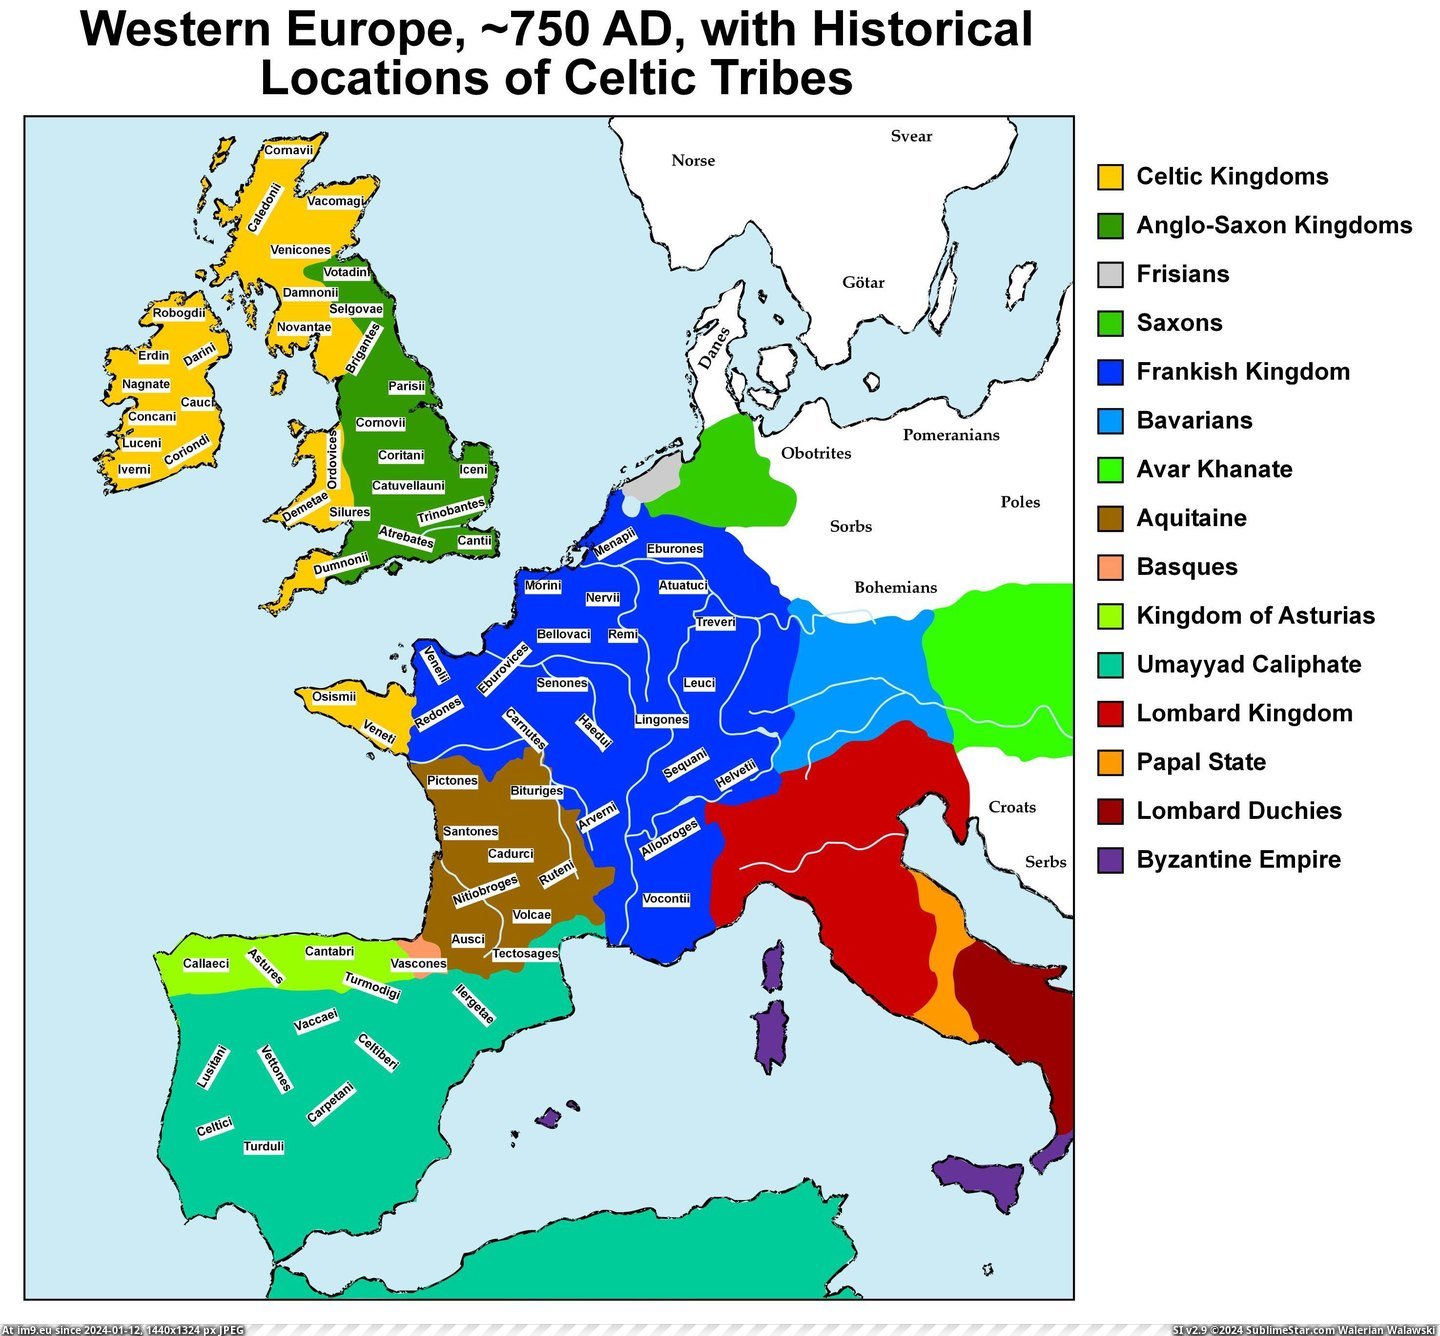 #Europe #Western #Celtic #Tribes #Historical #Locations [Mapporn] Historical locations of Celtic tribes in Western Europe in ~750 AD [2950x2725] Pic. (Obraz z album My r/MAPS favs))